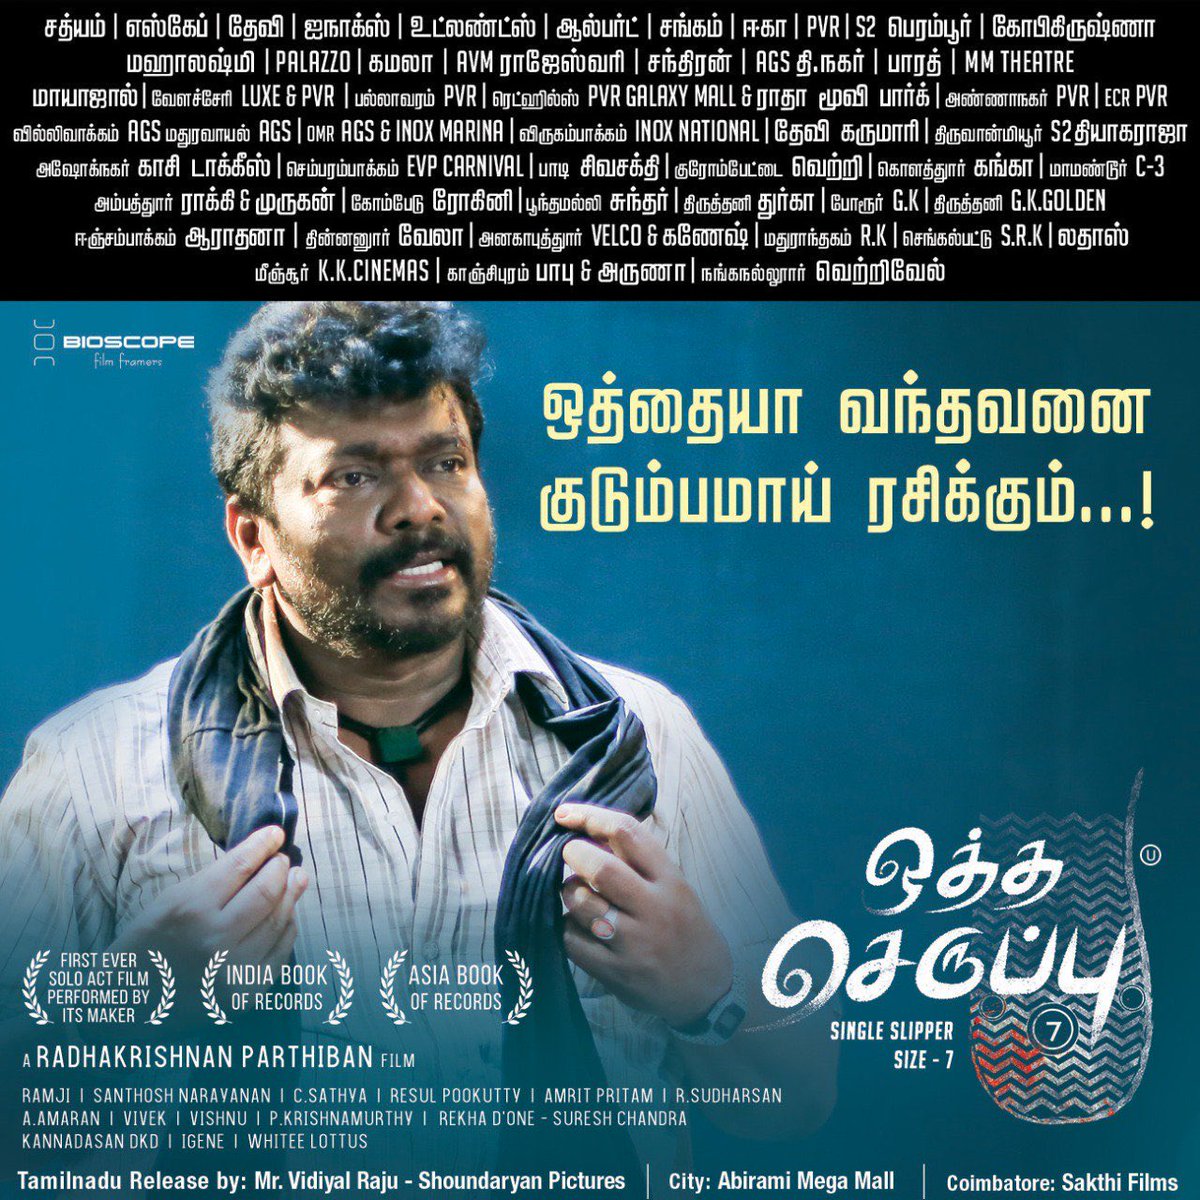 #os7 #OththaSeruppu #OththaSeruppuSize7 Wow wow wow what a brilliance @rparthiepan is a cinematic genius|its witty, it’s funny, it’s serious|perfect thriller pkg without realizing it’s a monodrama|@resulp sound design is solid|A new Genre of film making introduced|MUST SEE